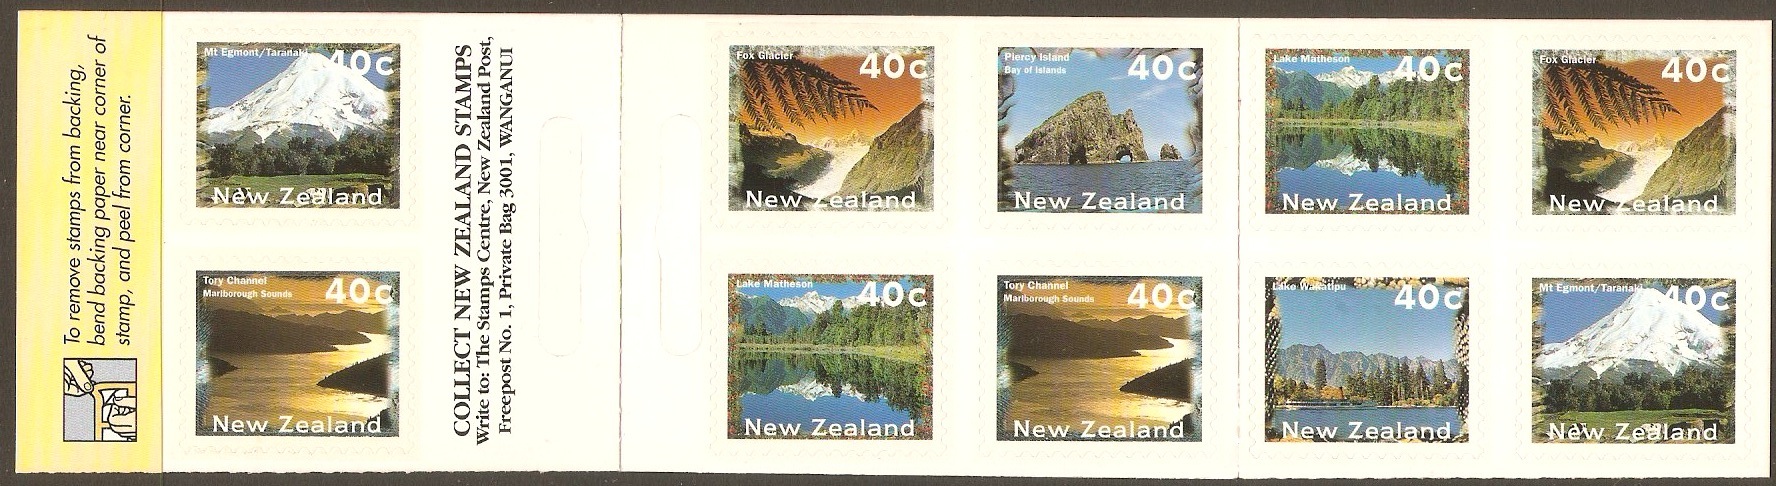 New Zealand 1996 Scenery Series Booklet. SG1984b-1987.